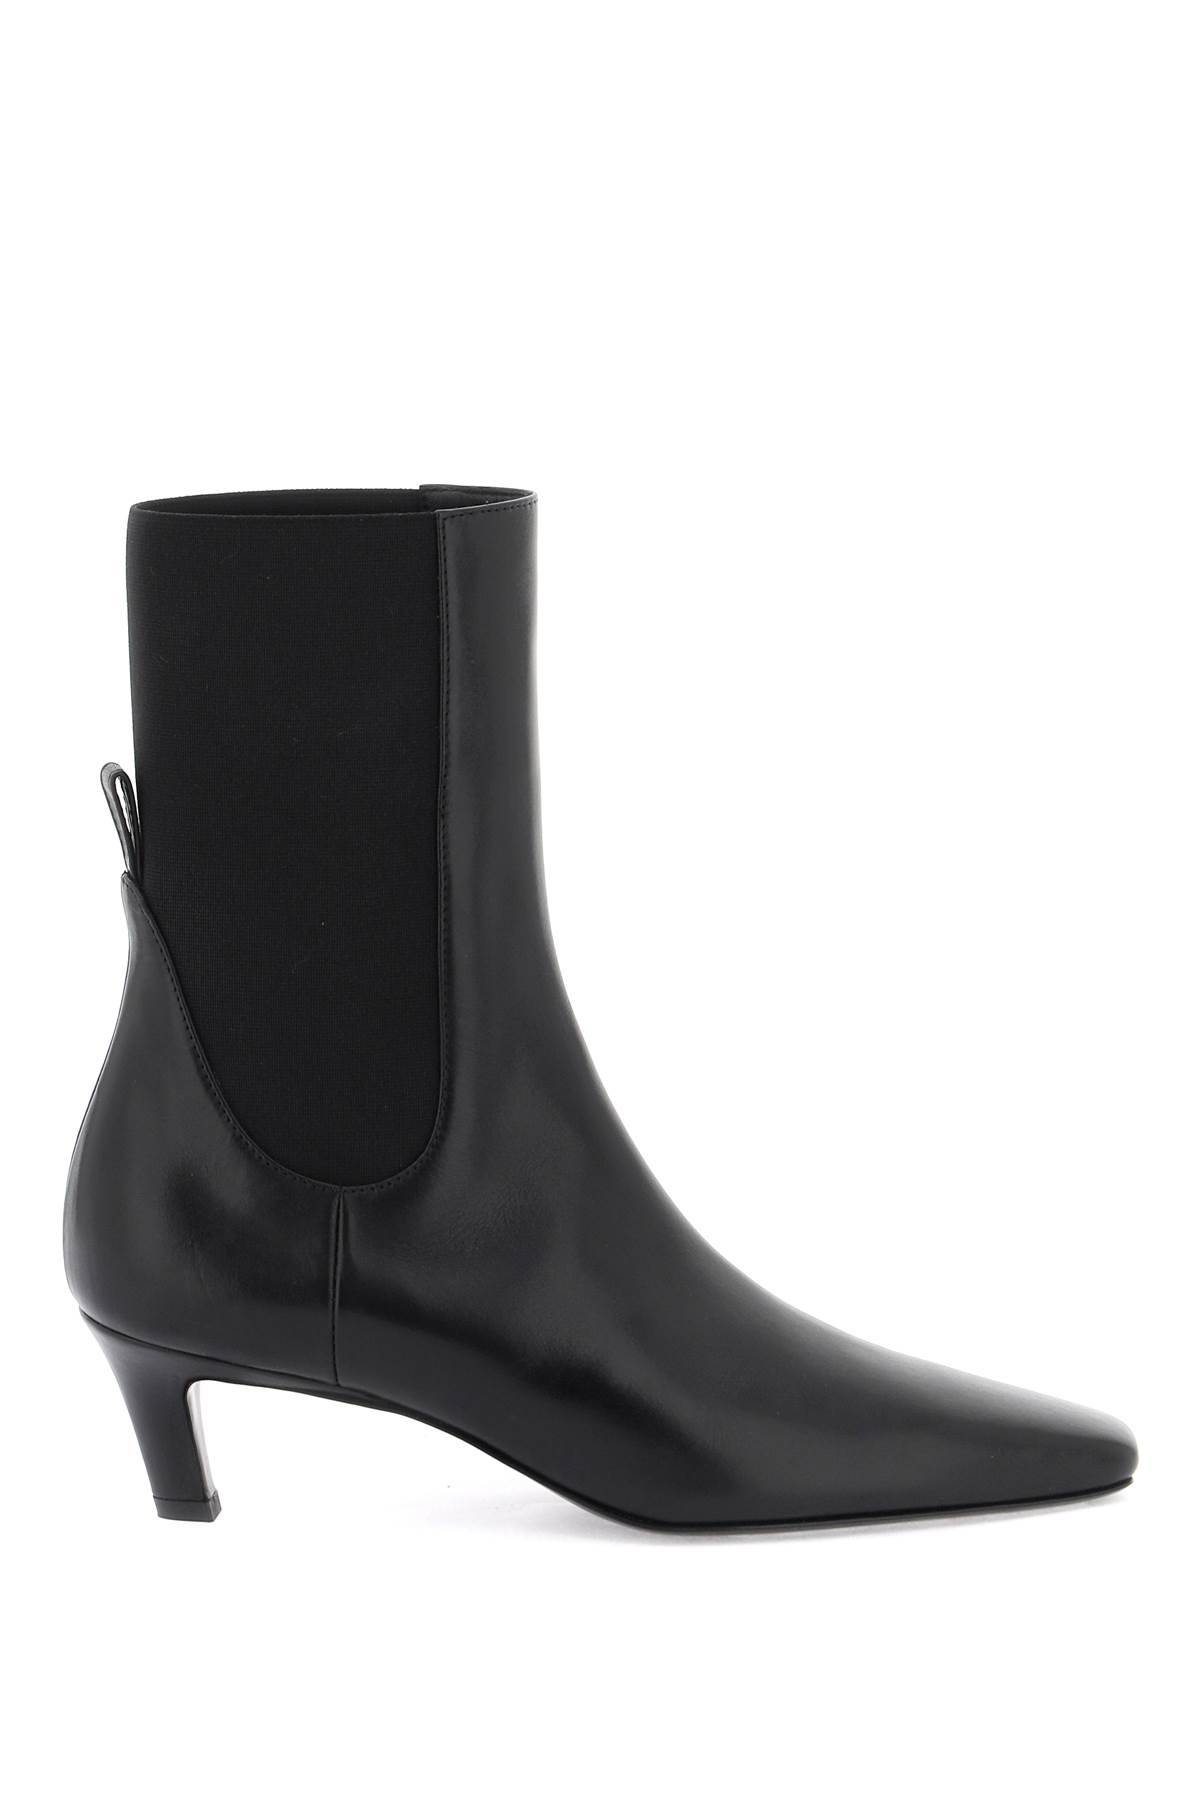 TOTEME mid heel leather boots